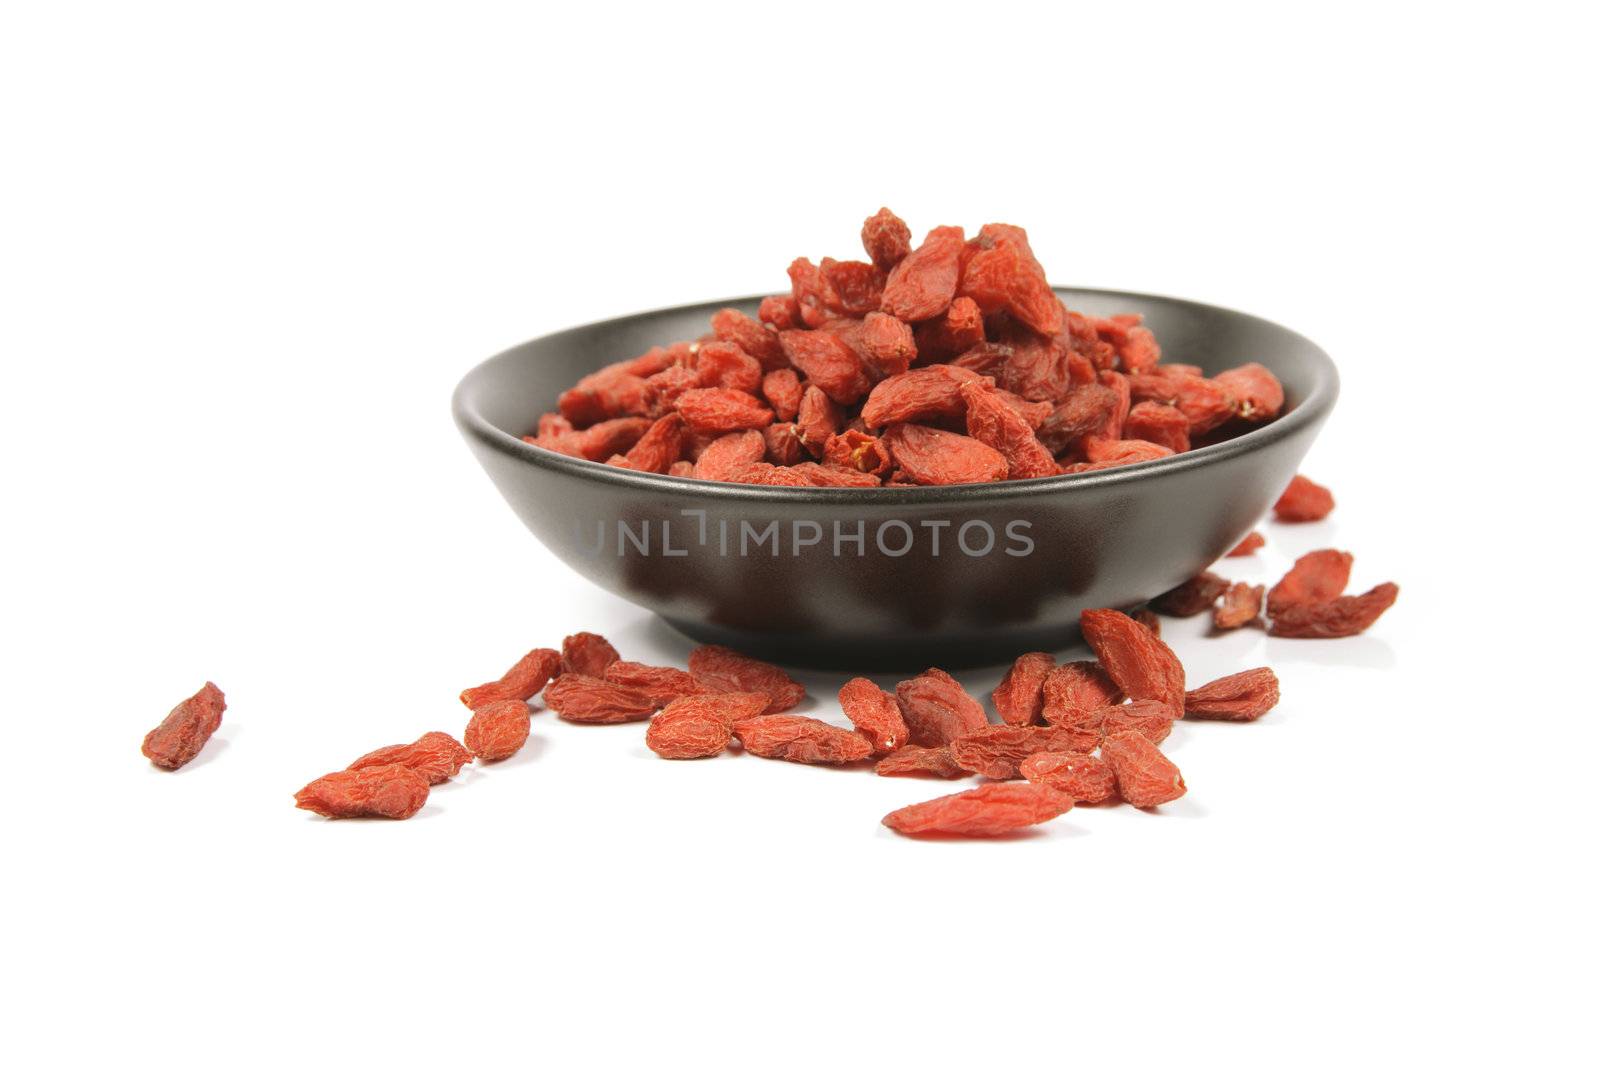 Red dry goji berries in a small black dish on a reflective white background